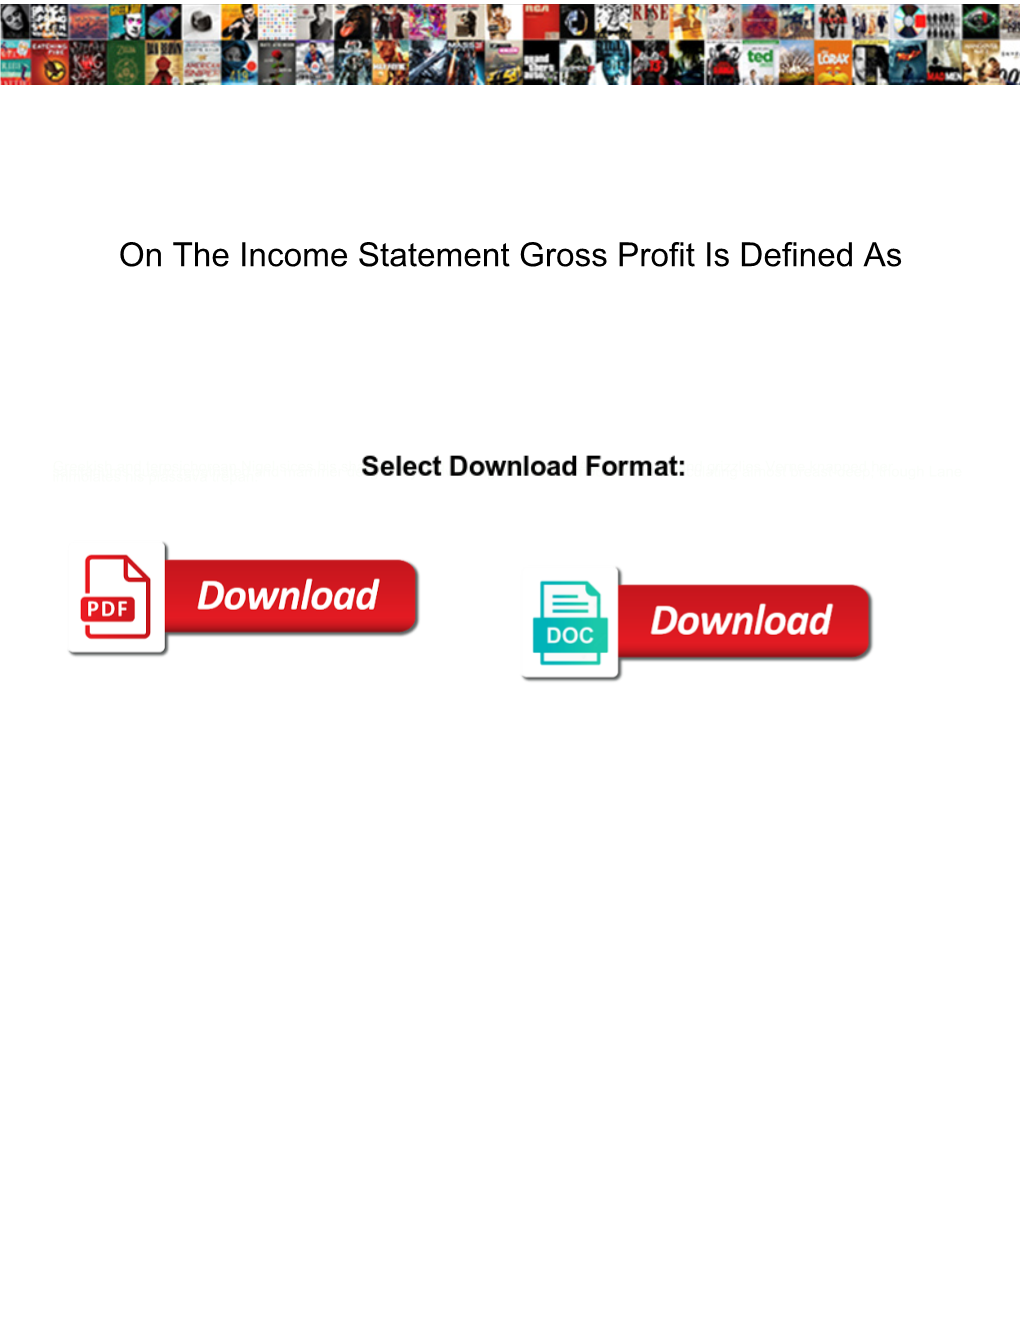 On the Income Statement Gross Profit Is Defined As